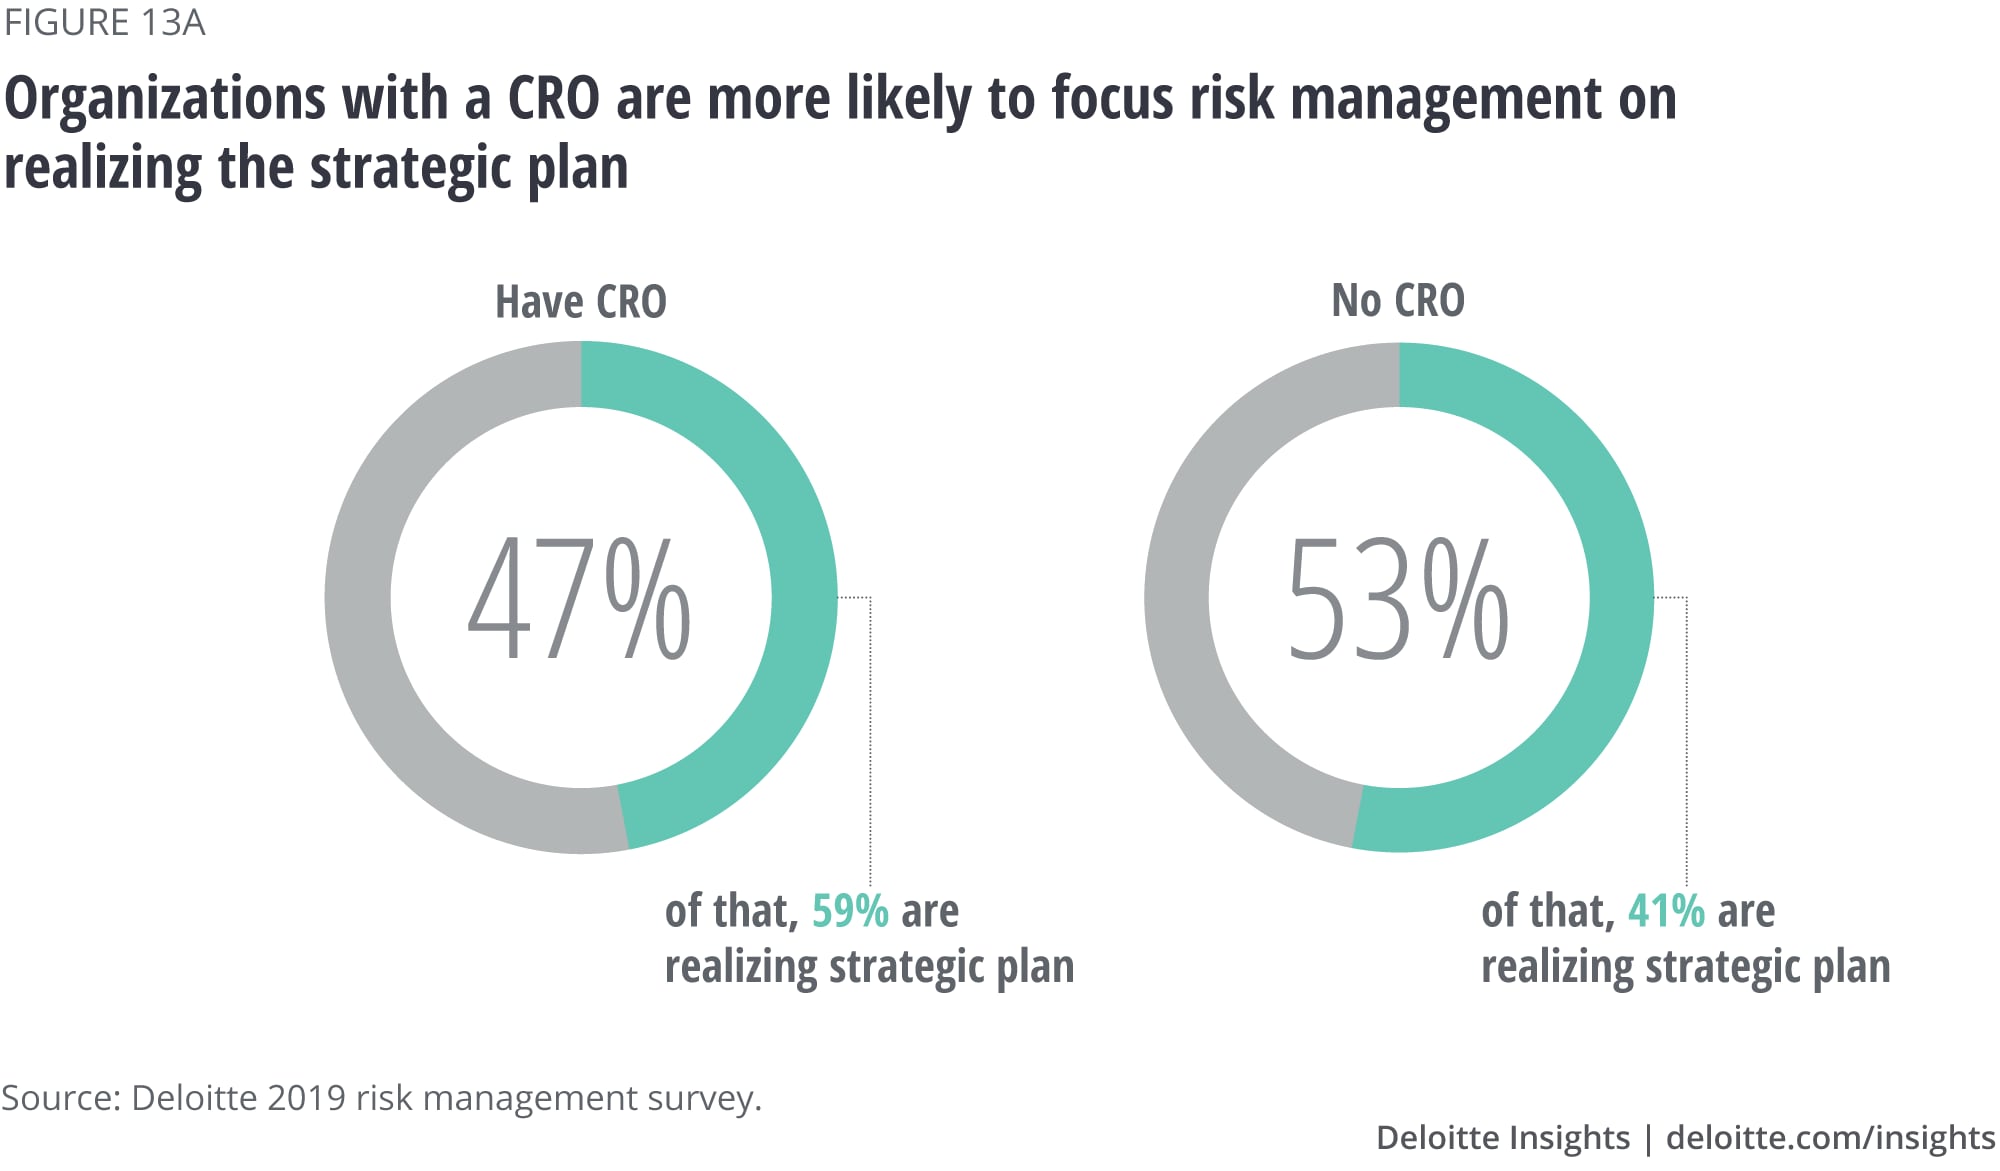 Organizations with a CRO are more likely to focus risk management on realizing the strategic plan